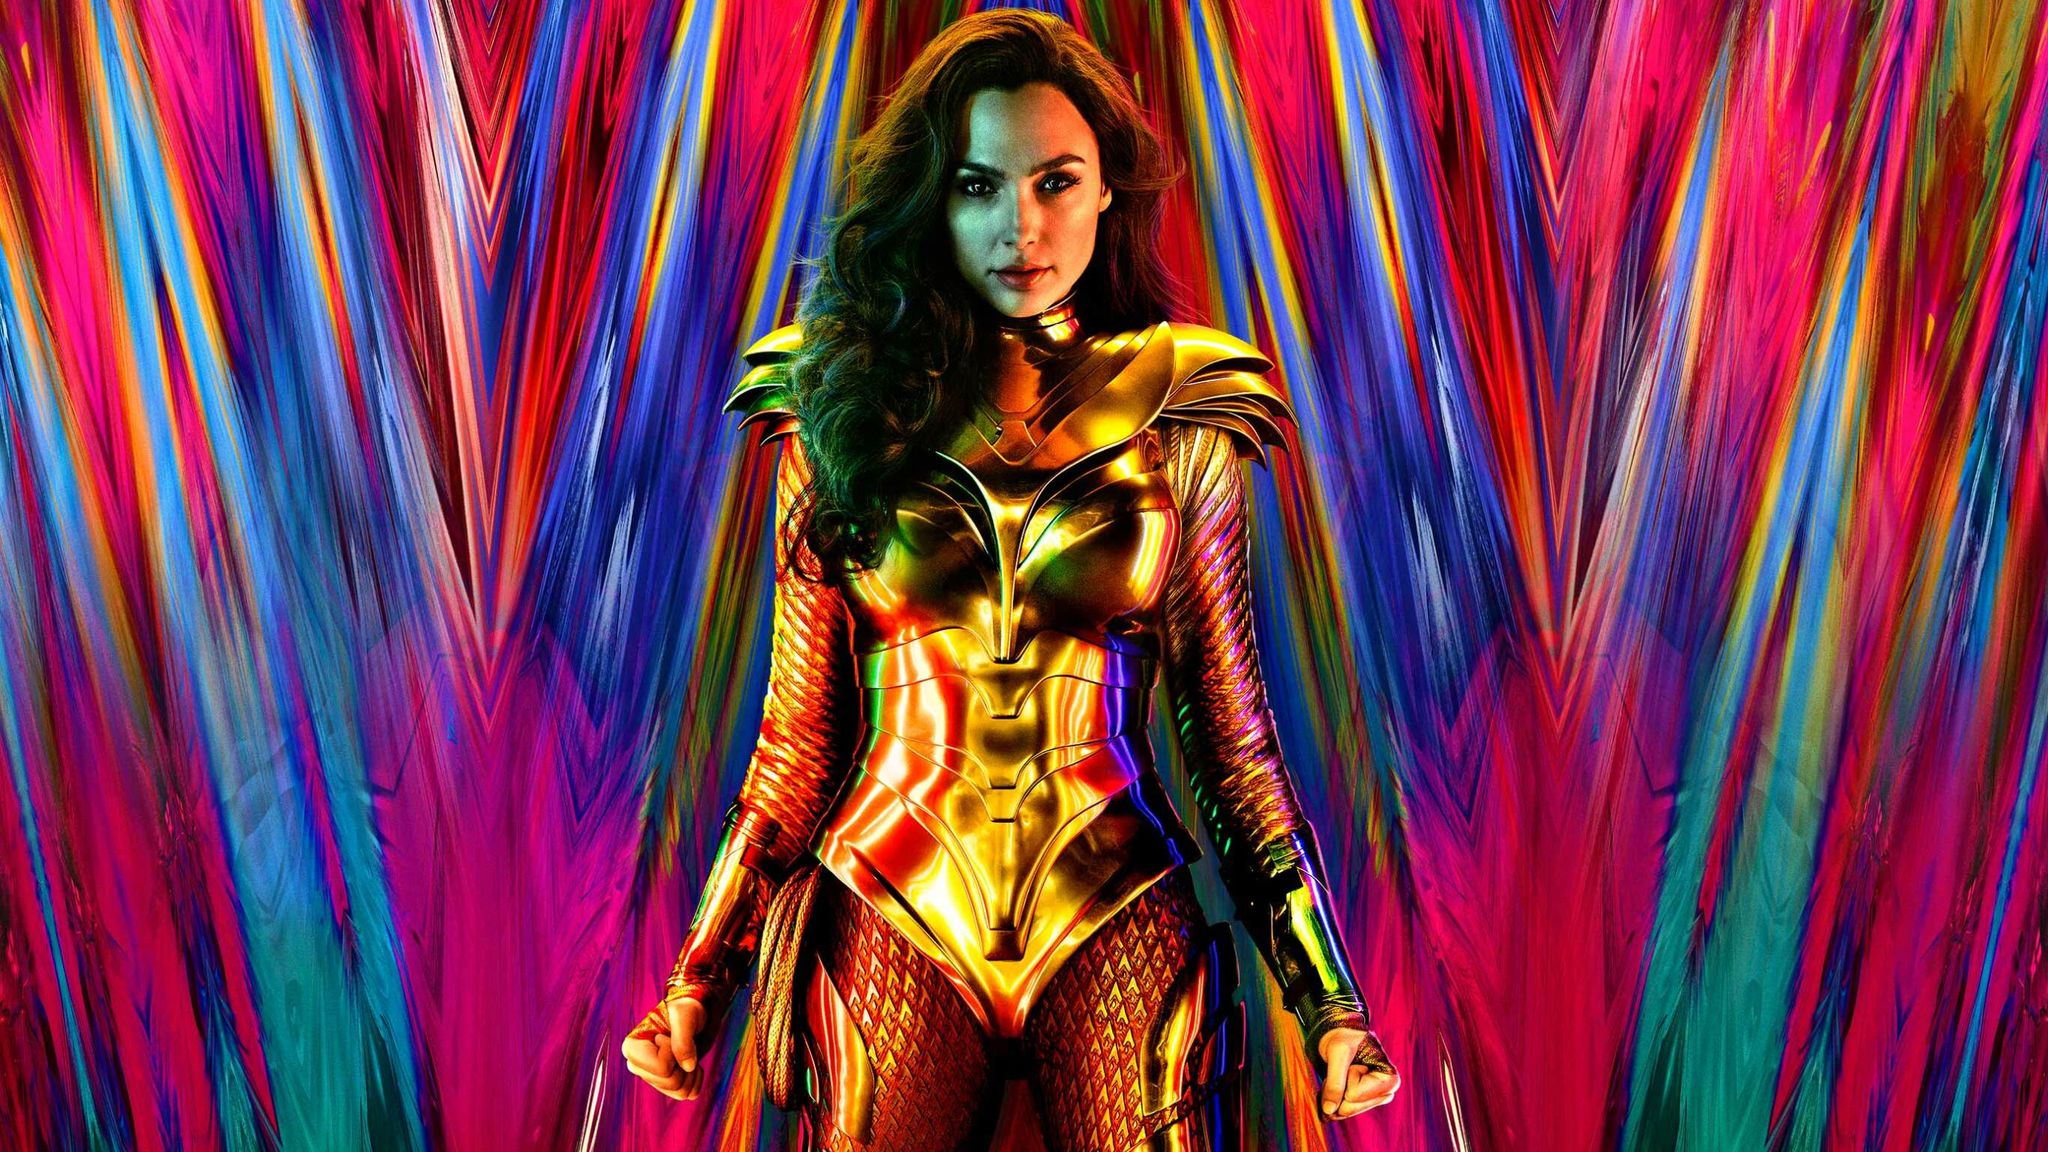 Download Wonder Woman 1984 Gal Gadot Is Back To Save The World And With Any Luck Christmas Too Contains Mild Spoilers Ents Arts News Sky News